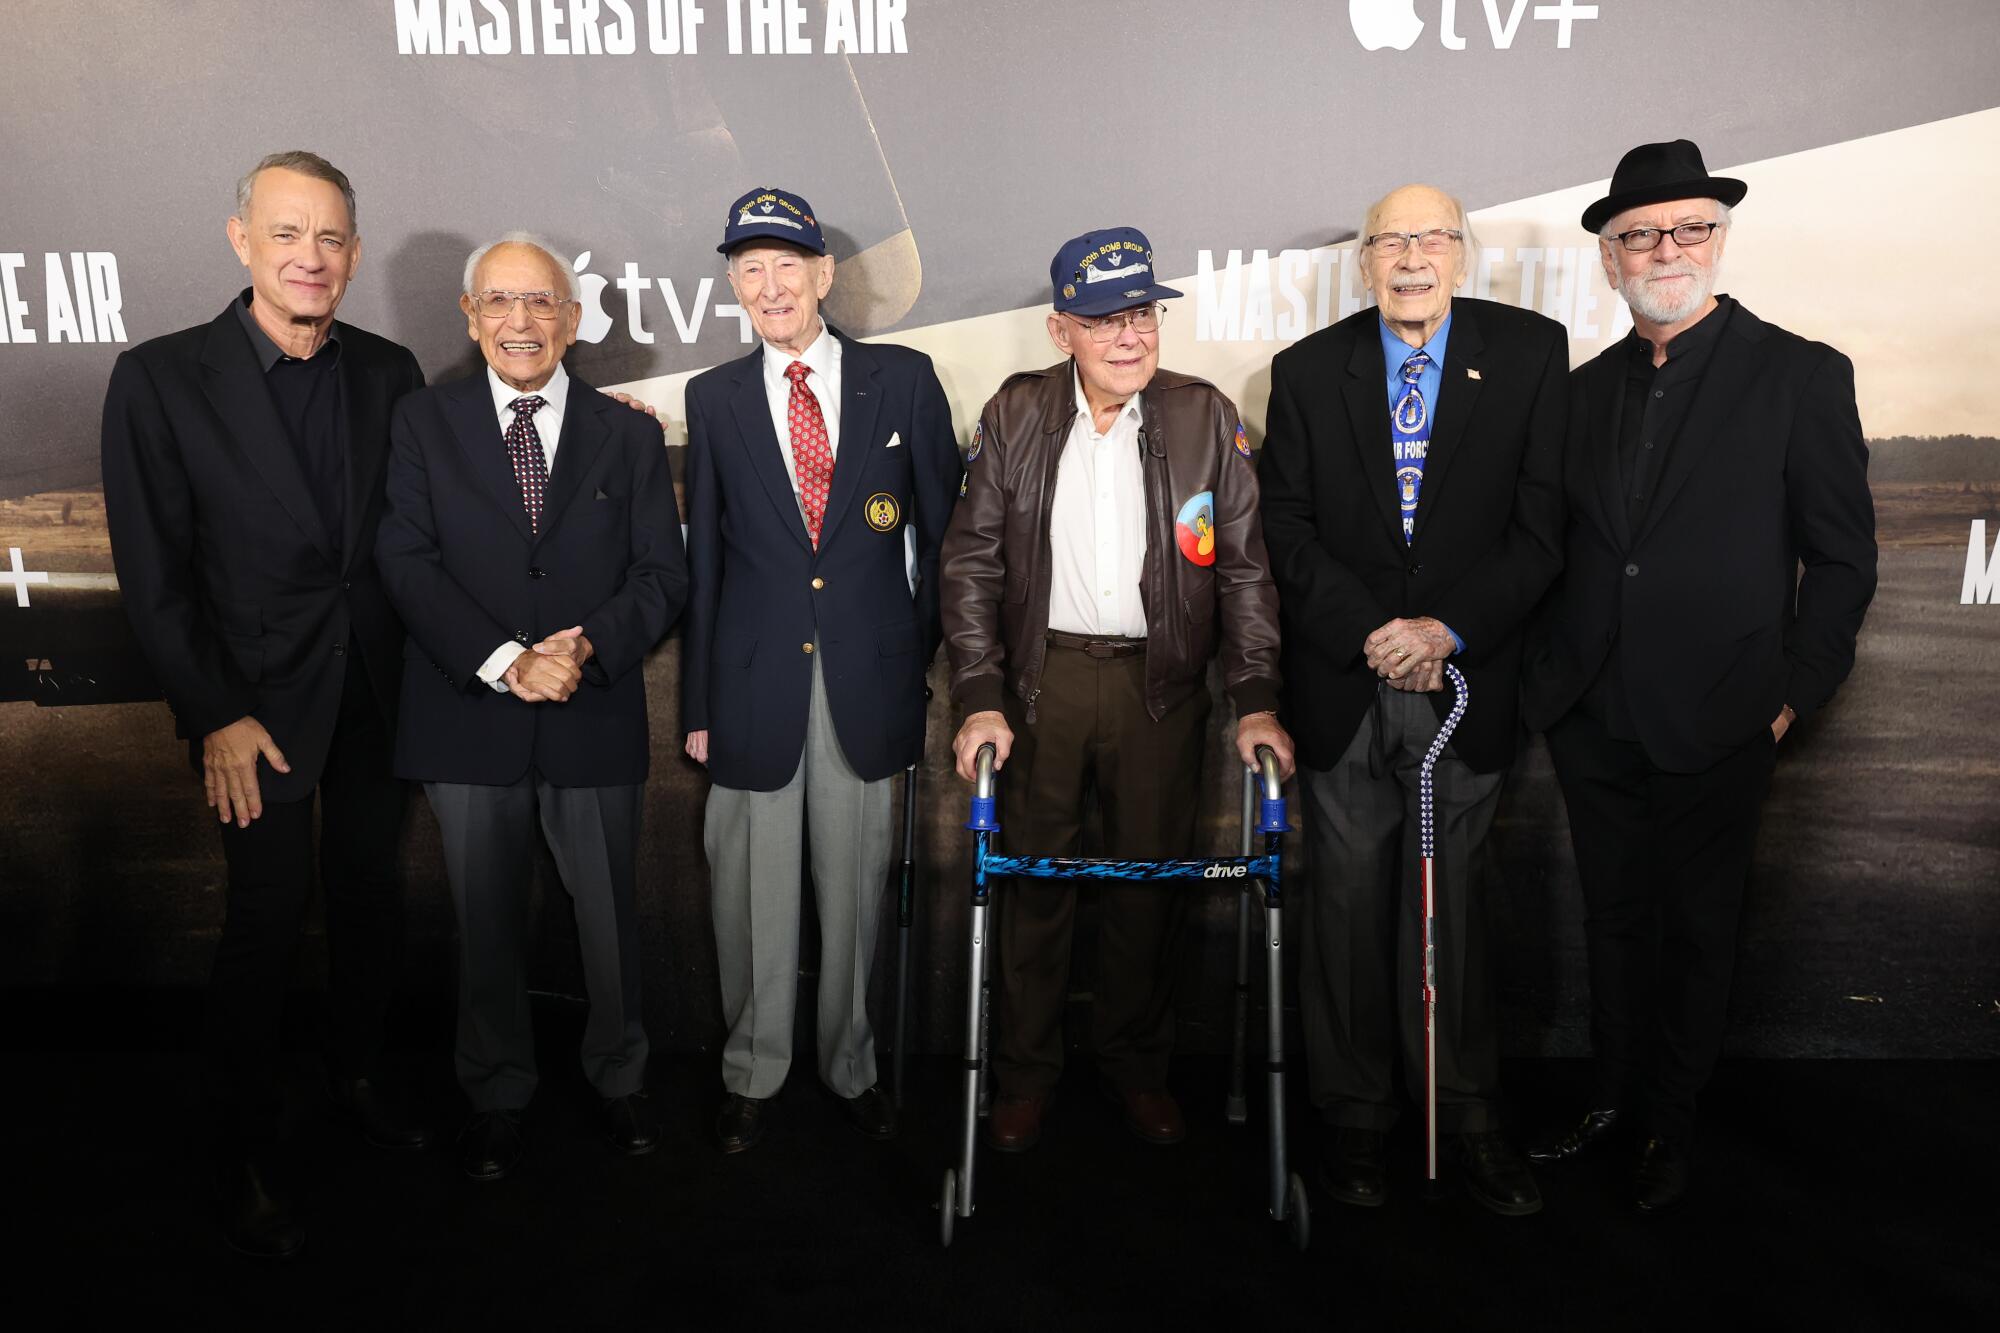 Six men, including one using a walker and another holding a cane, pose for photographs